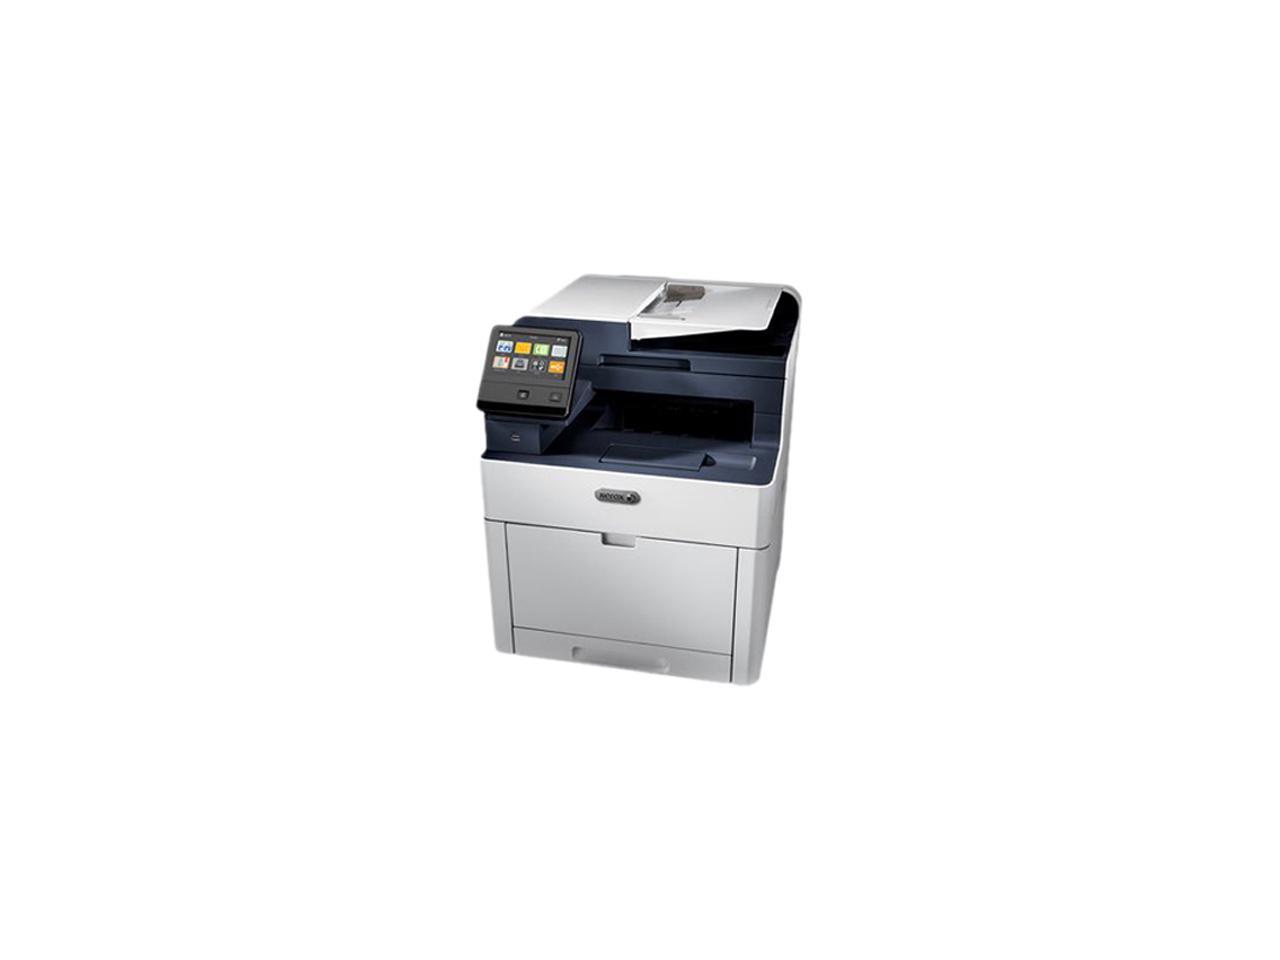 Xerox WorkCentre 6515DNI Duplex Wireless Multifunction Color Laser Printer, Up To 30ppm, 2-Sided Print, USB/Ethernet/Wireless